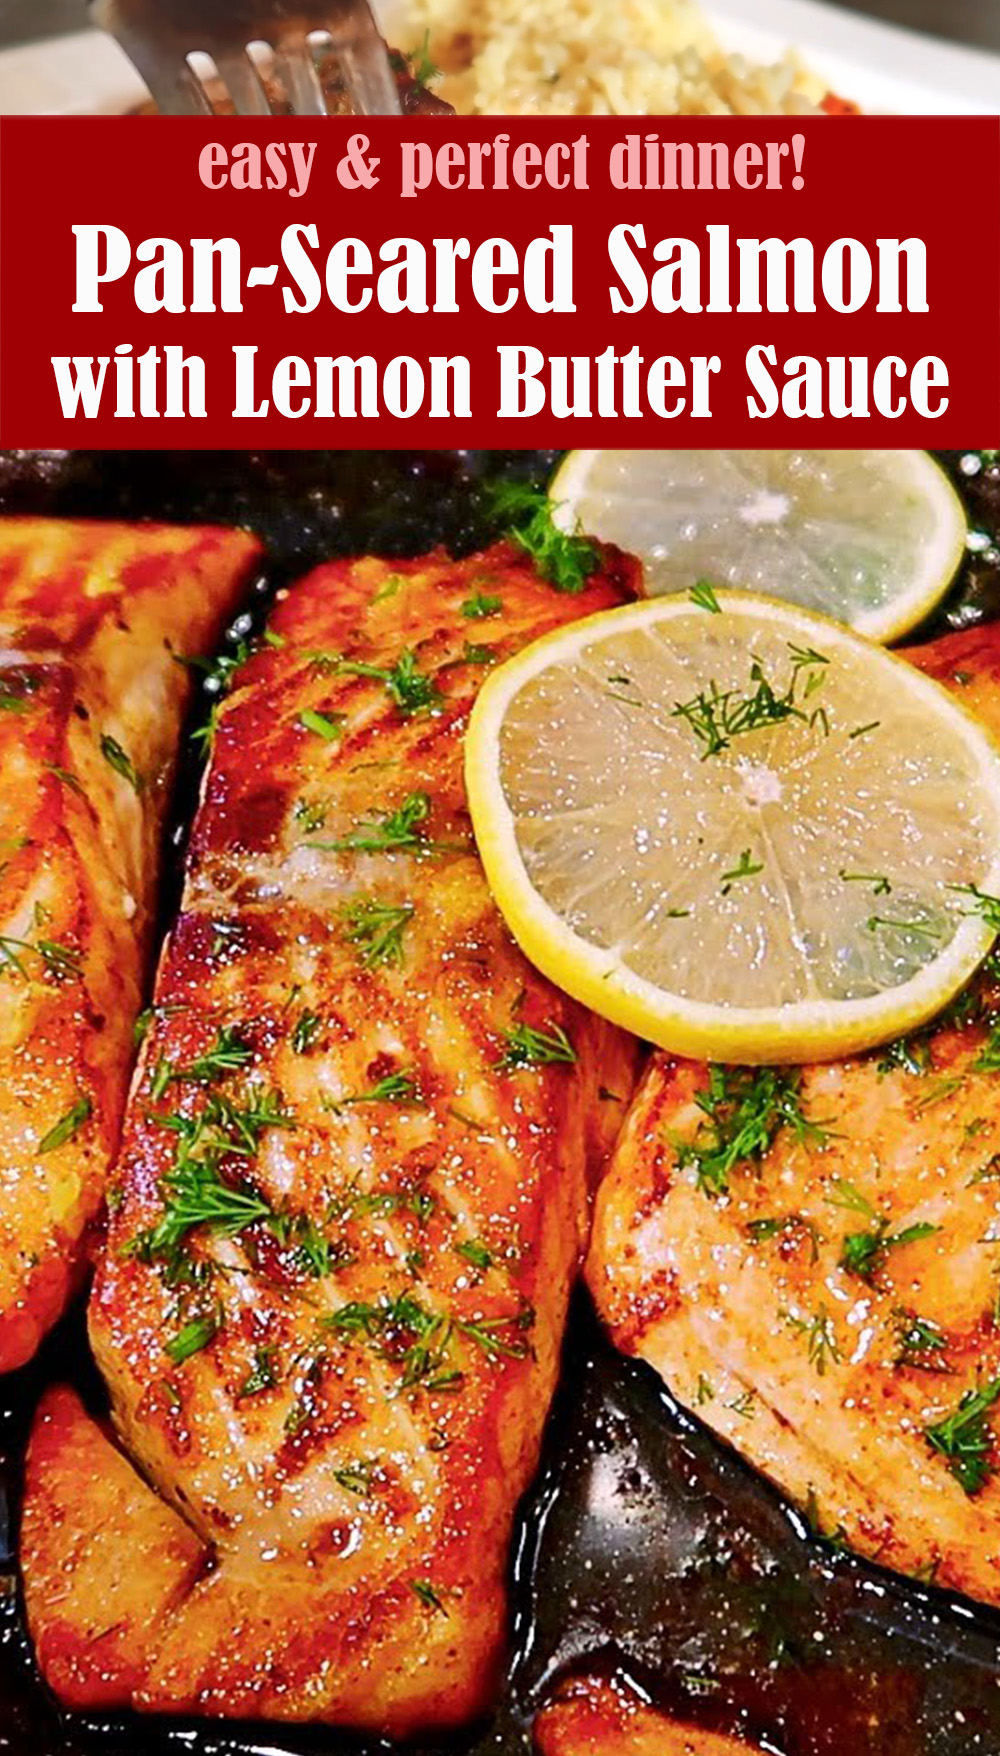 Easy Pan-Seared Salmon with Lemon Butter Sauce